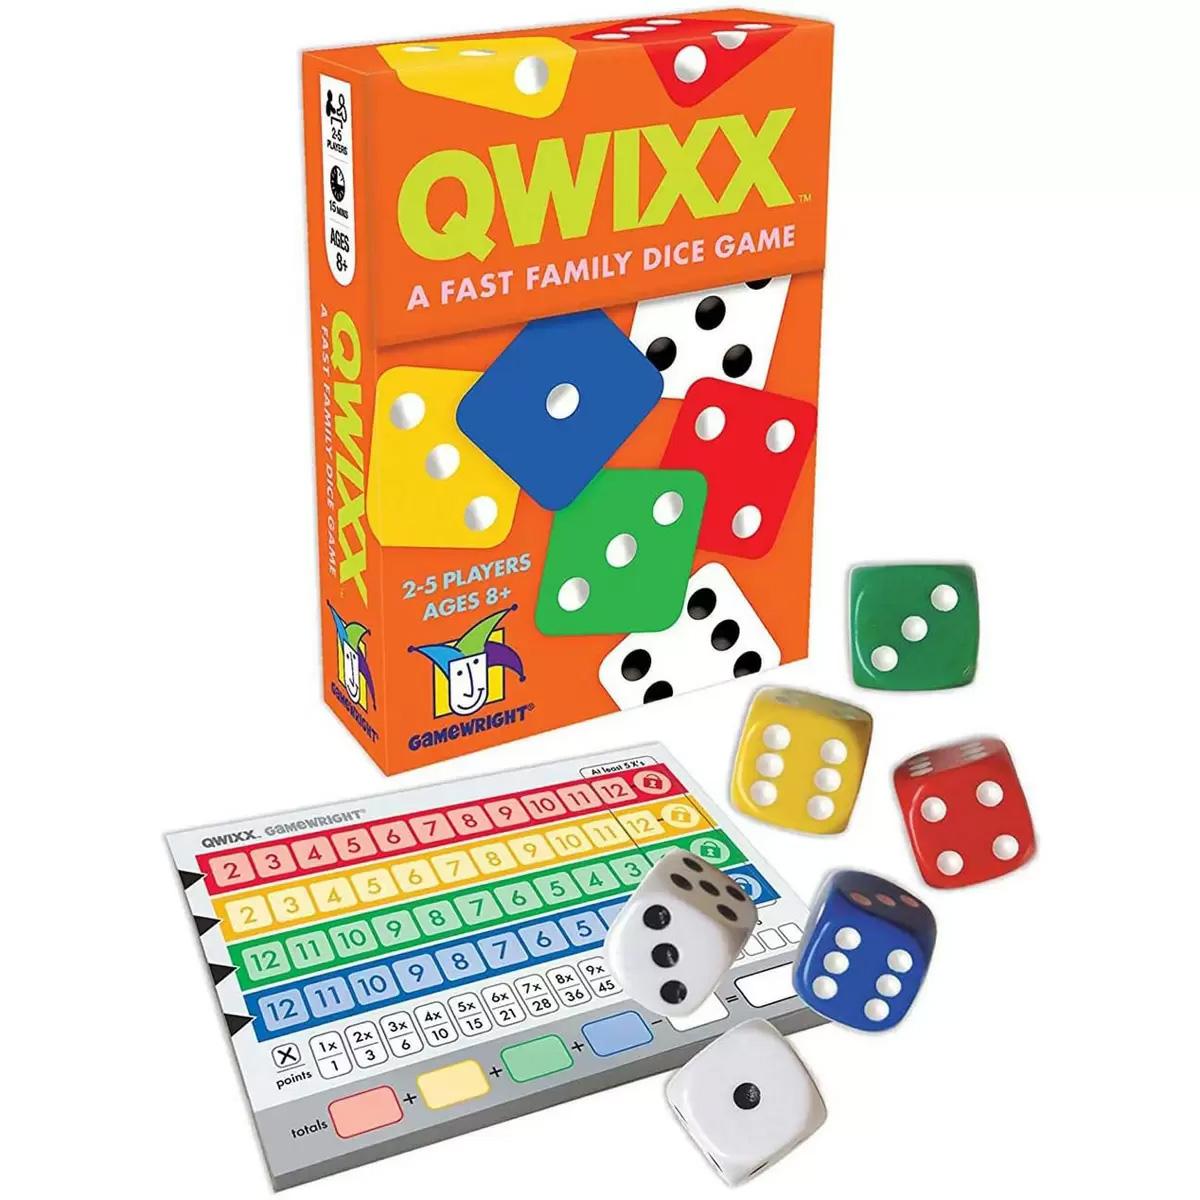 Gamewright Qwixx Dice Game for $4.99